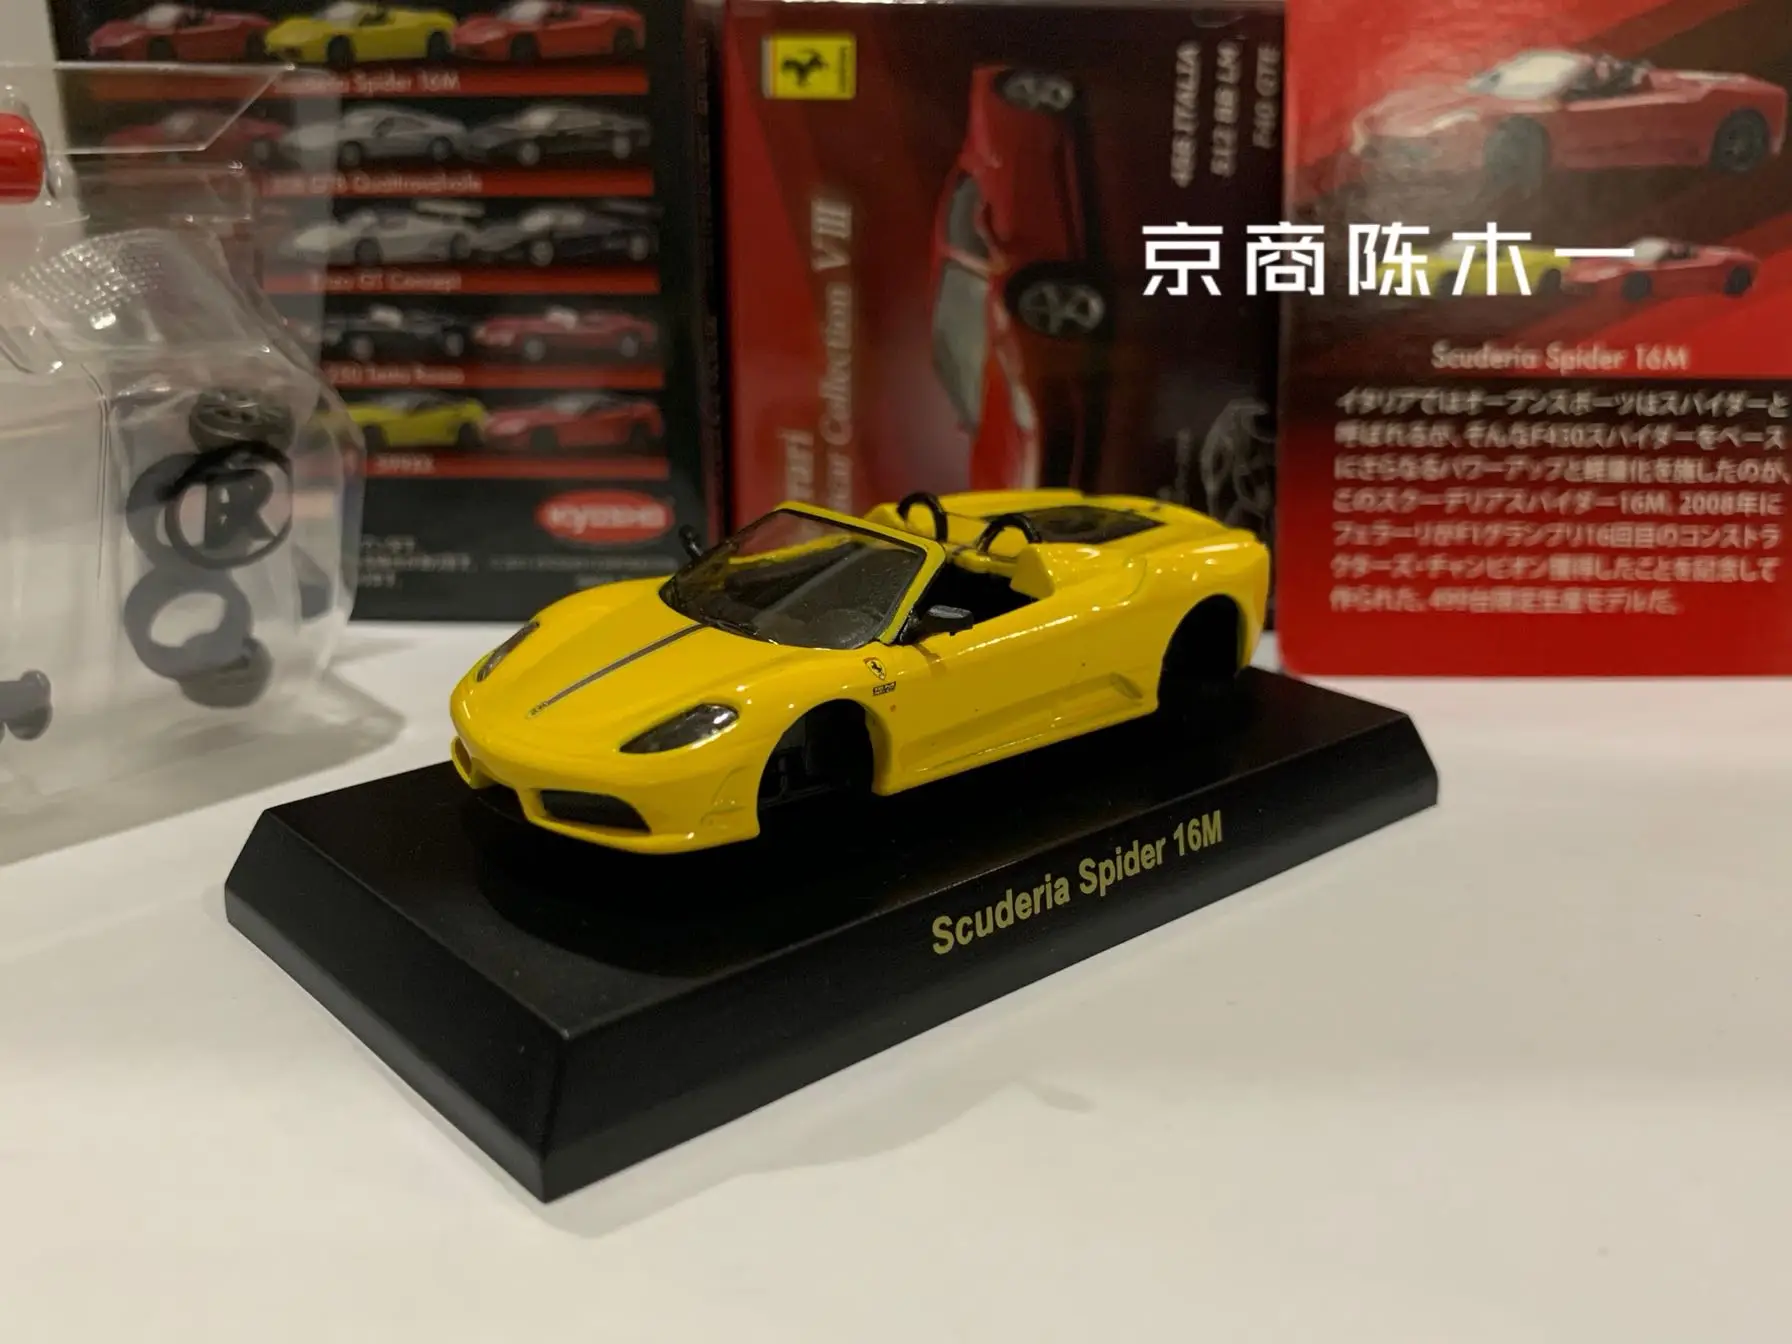 

1/64 KYOSHO Ferrari F430 Special Edition Scuderia Spider Yellow 16M Collection of die-cast alloy car decoration model toys